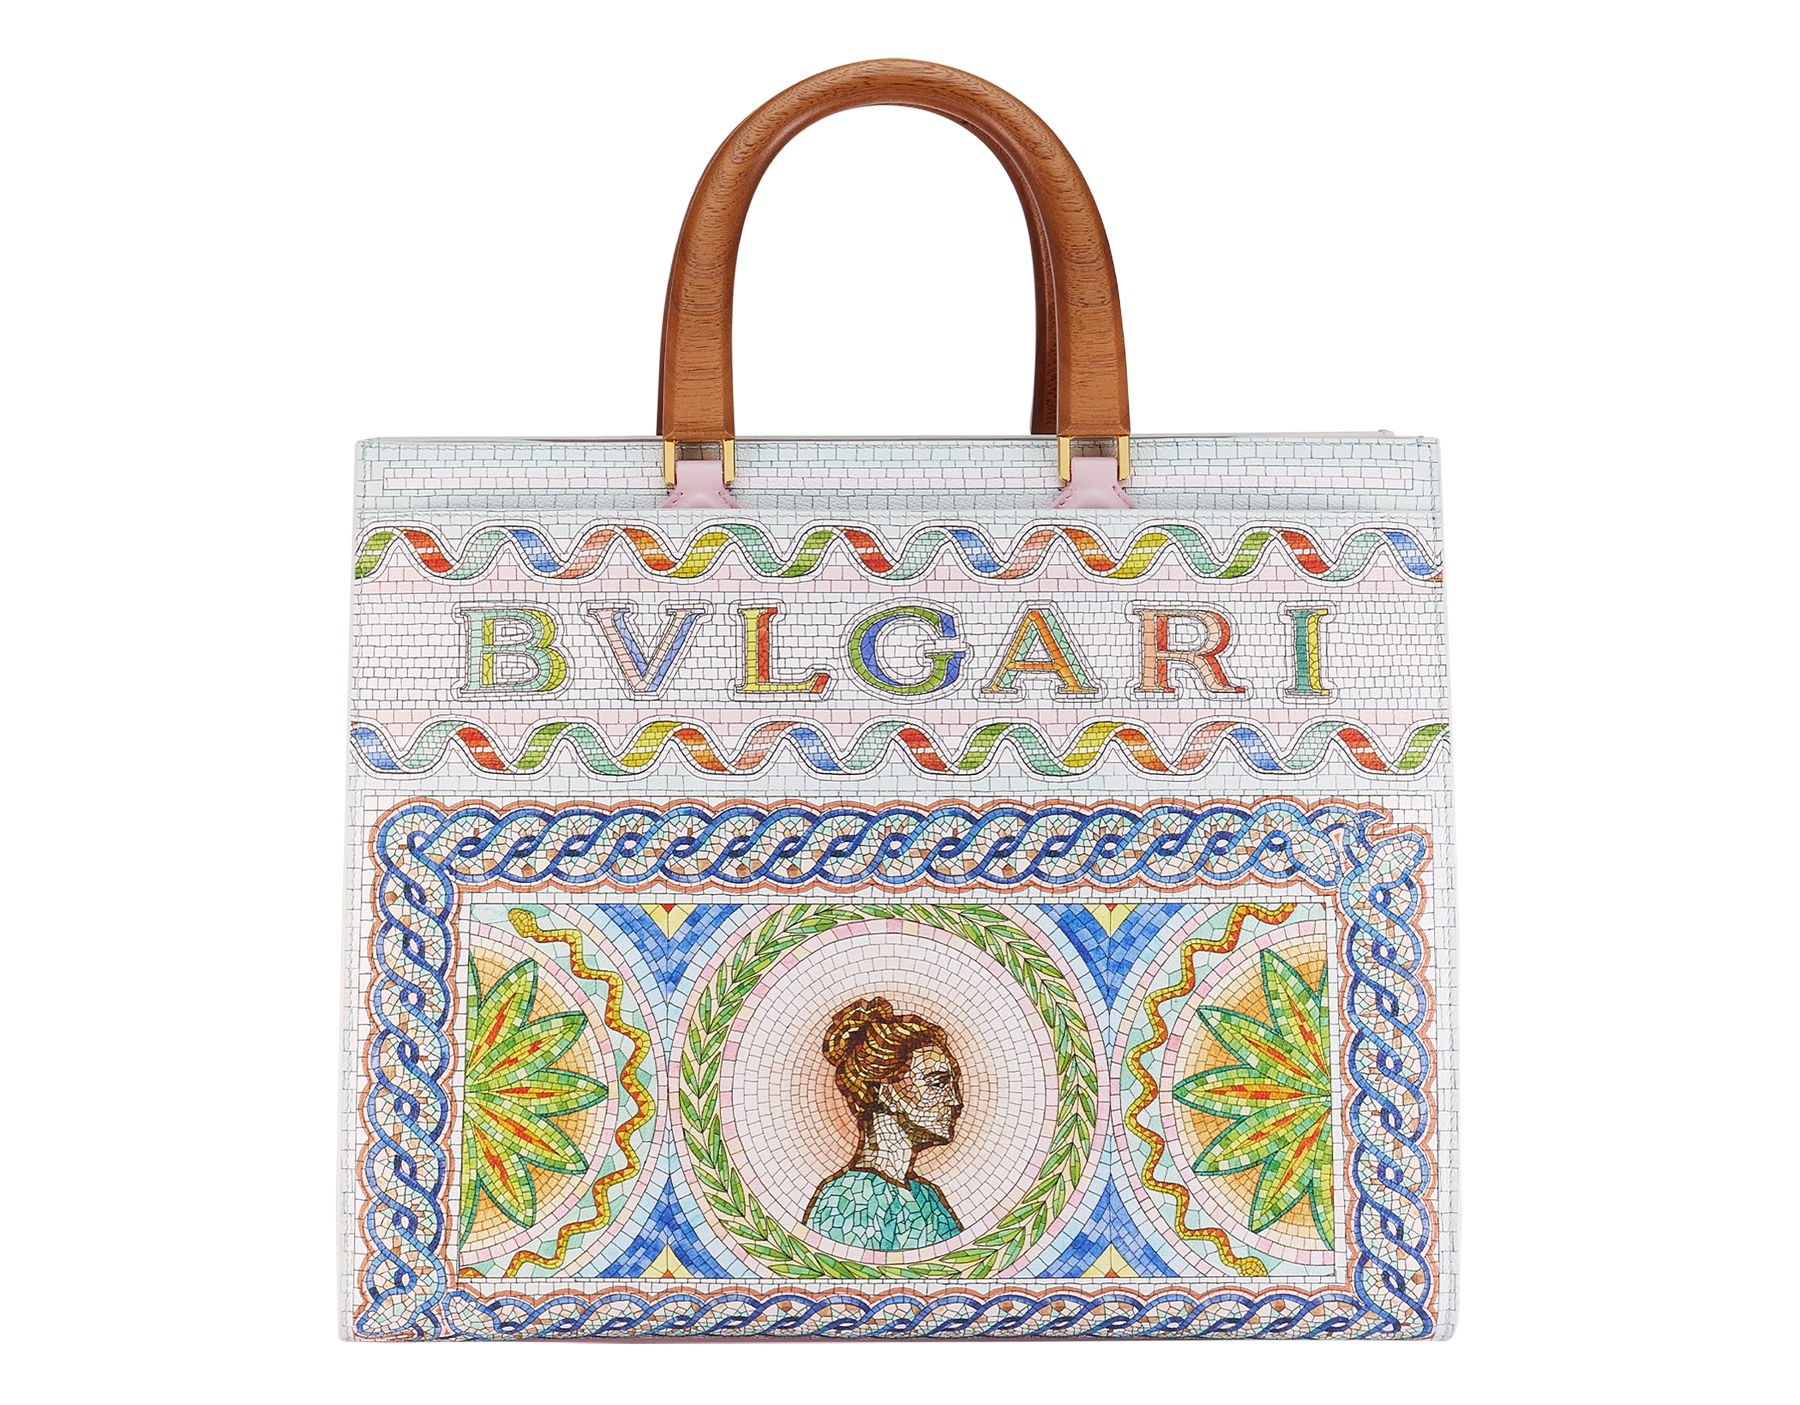 Casablanca x Bulgari large tote bag in soft grain printed calf leather featuring a Roman mosaic pattern, with dusty pink calf leather sides and dusty pink grosgrain lining. Iconic multicolor Bulgari decorative logo, gold-plated brass hardware and magnetic closure. 292416 image 1